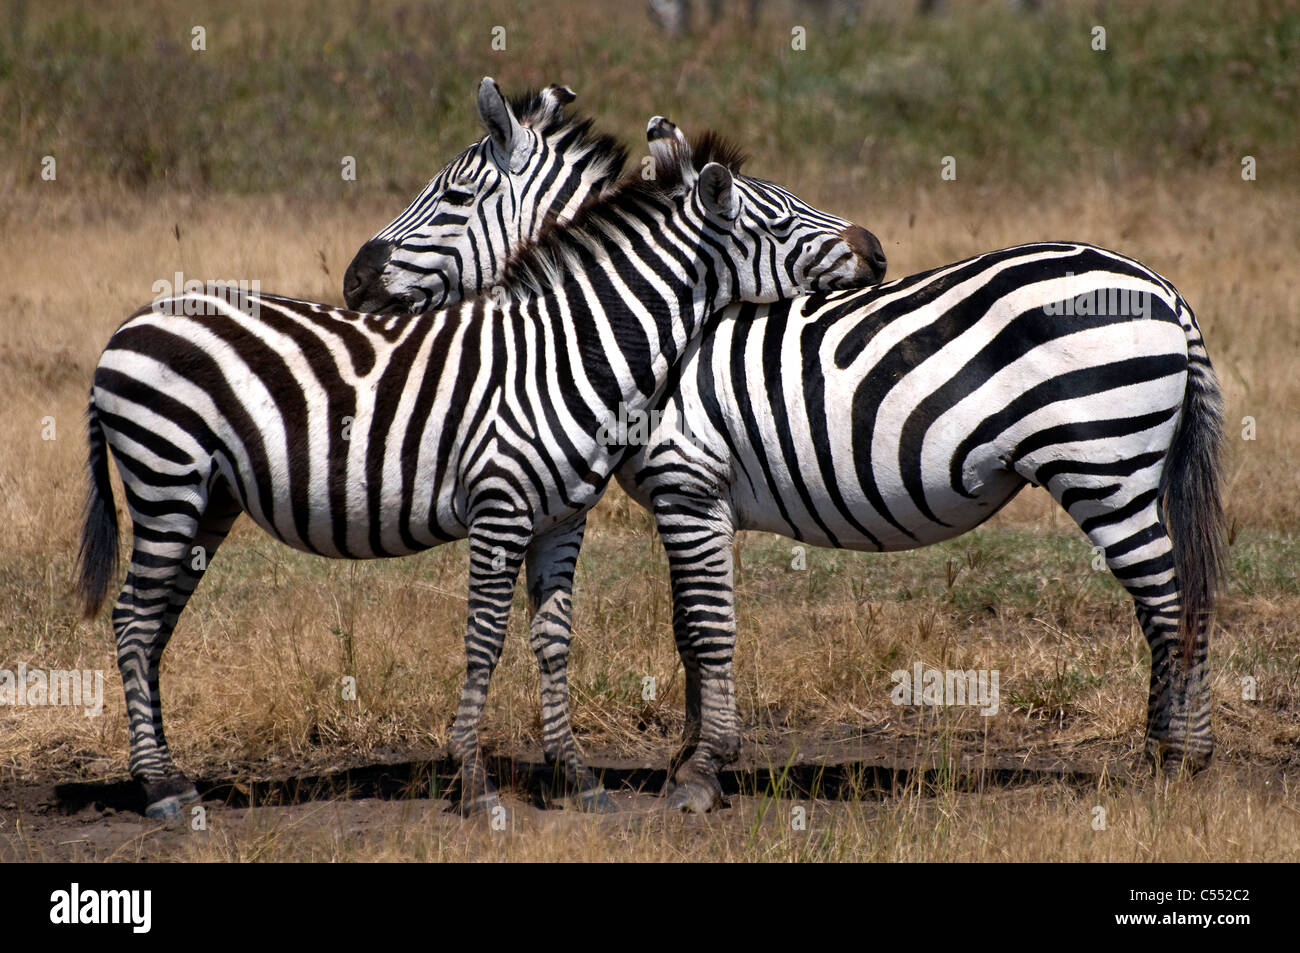 Two zebras standing in a field, Ngorongoro Conservation Area, Tanzania Stock Photo